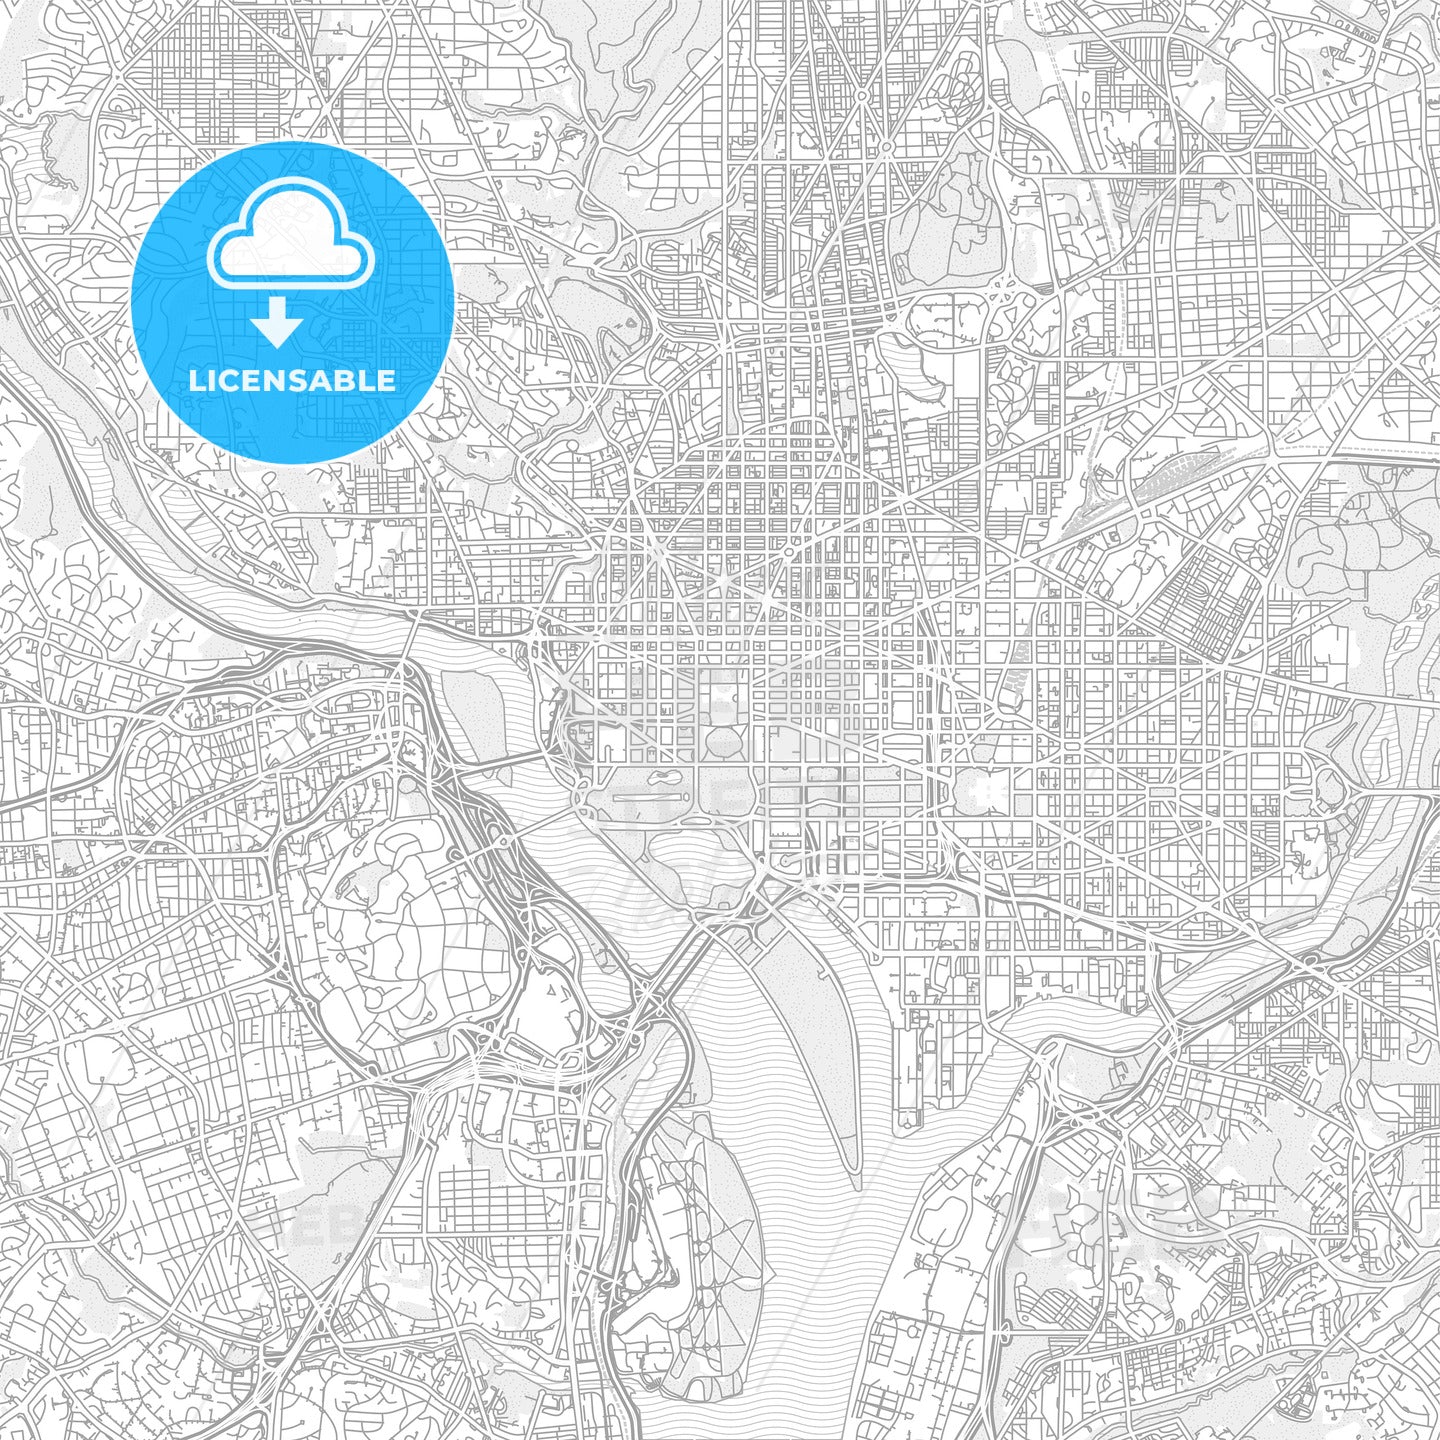 Washington, D.C., USA, bright outlined vector map